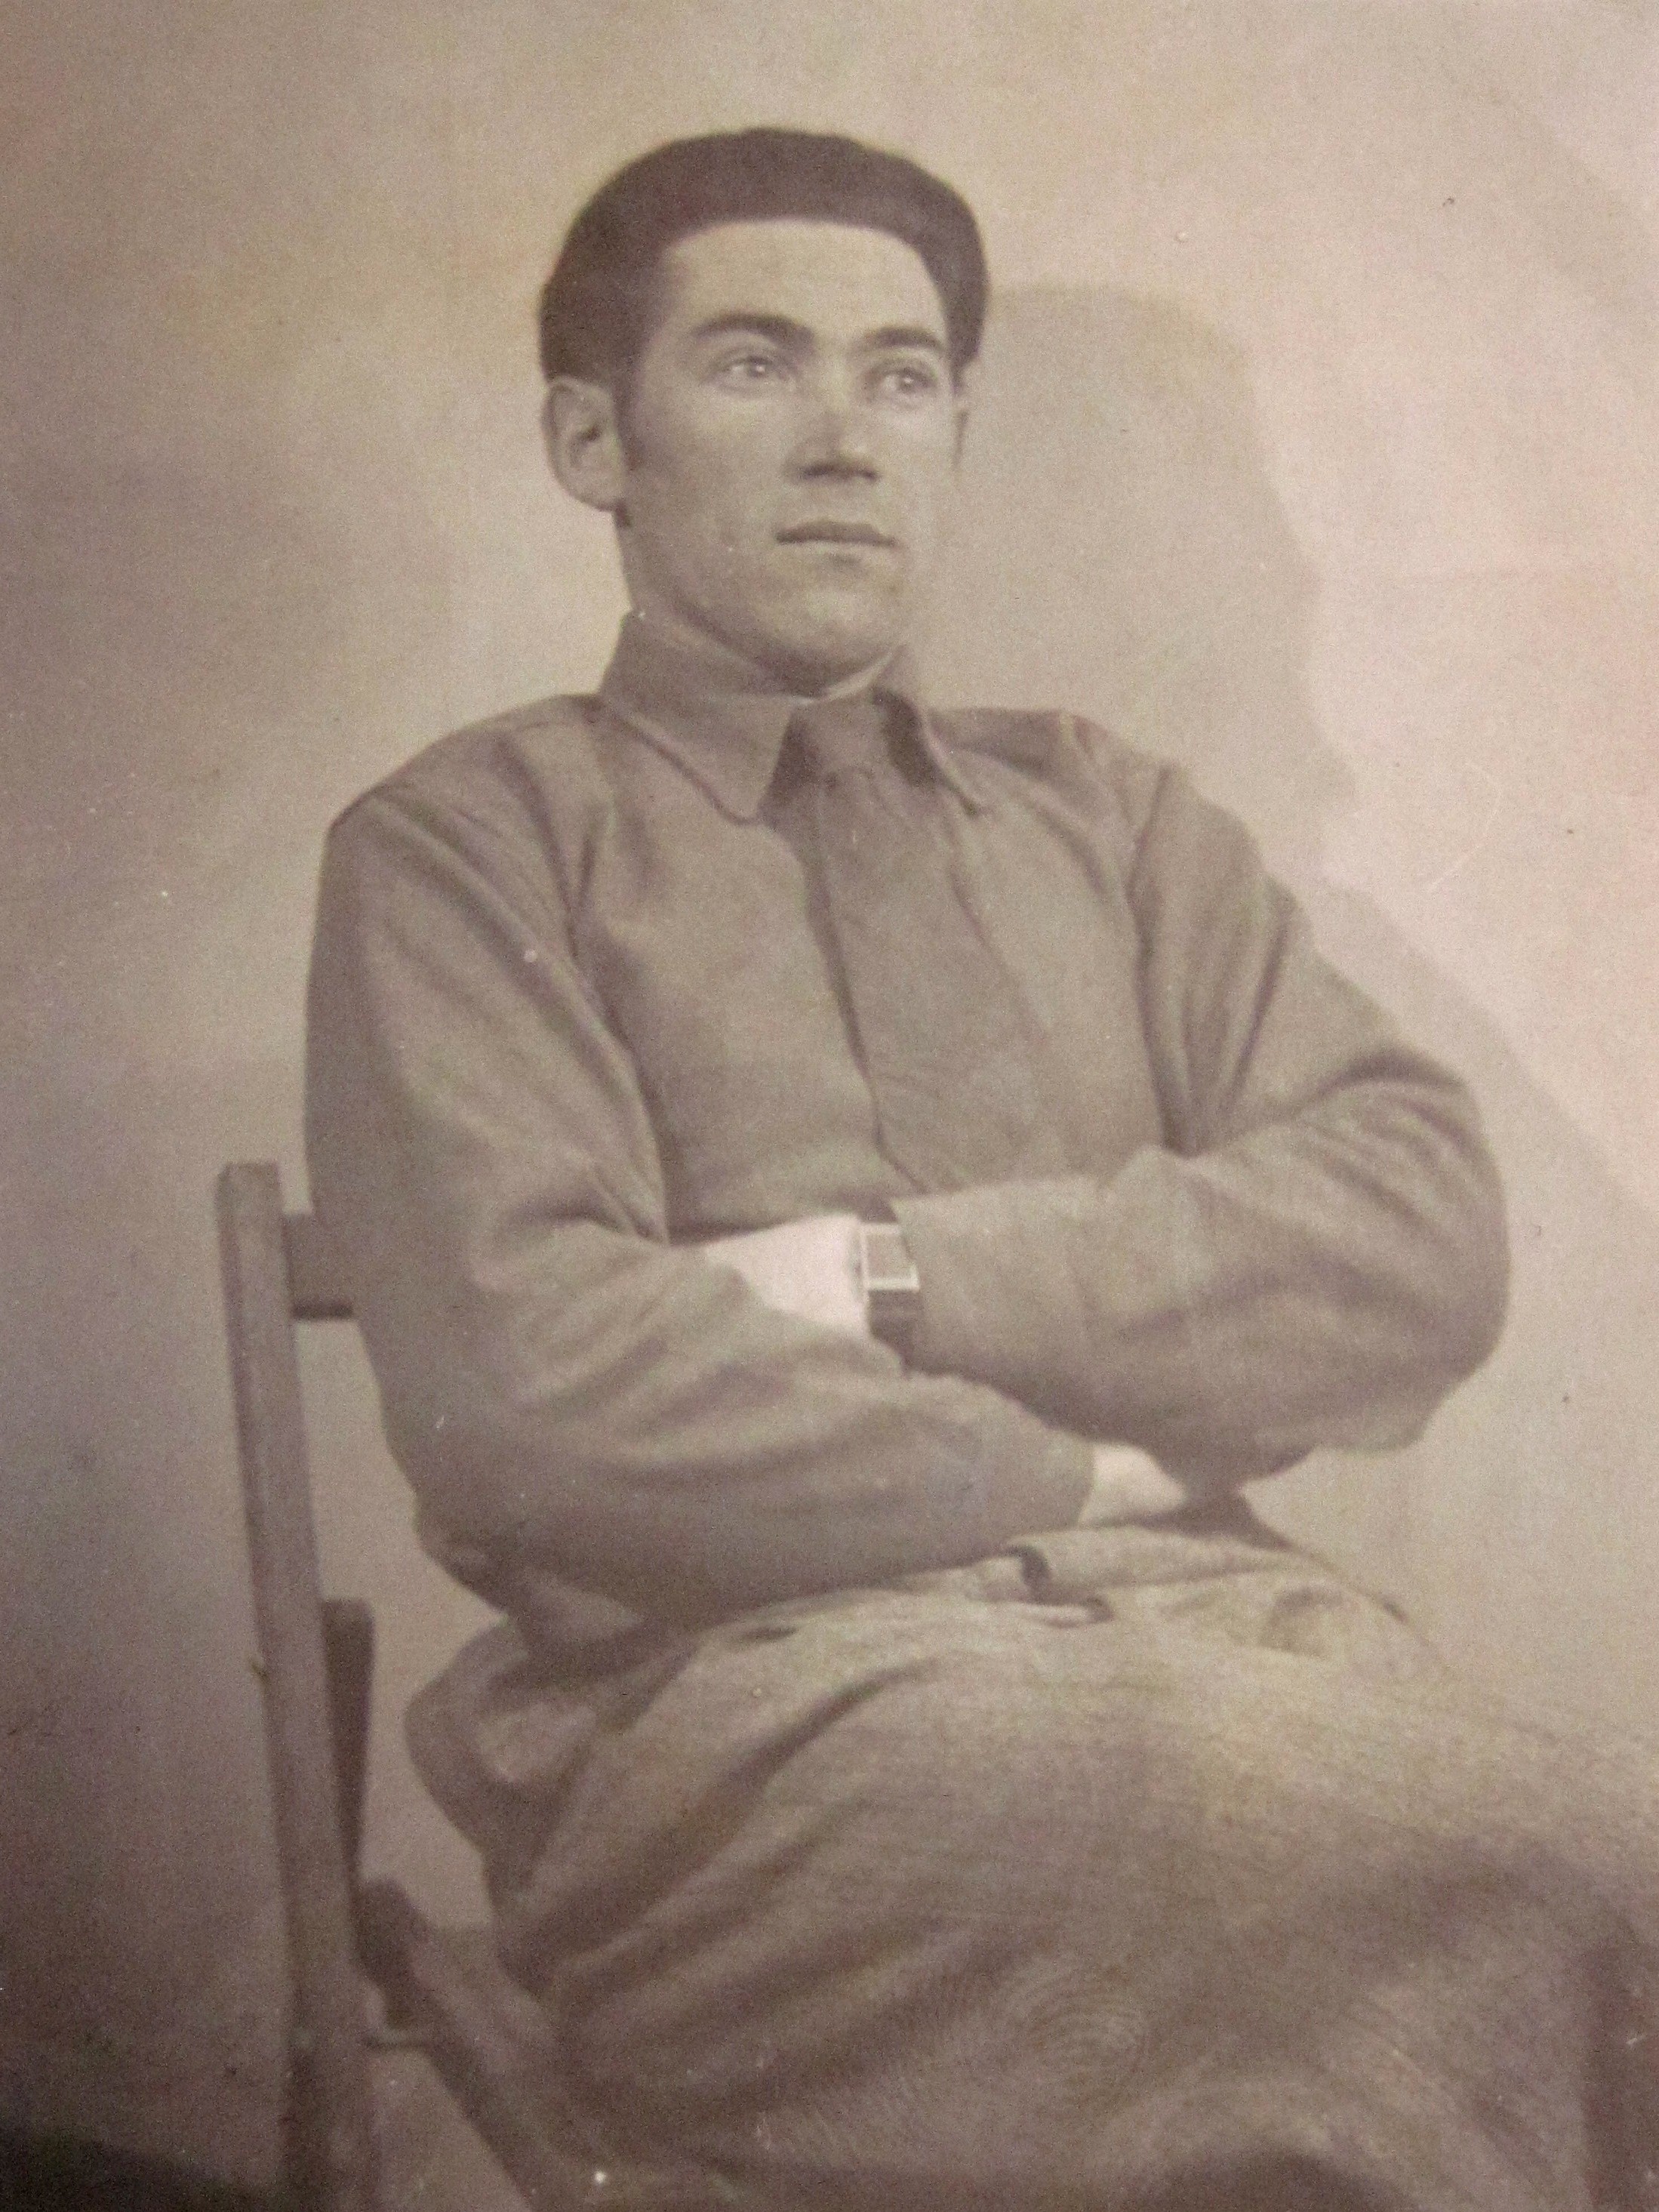 Ivan Prytulak, the family patriarch, in an undated photo.